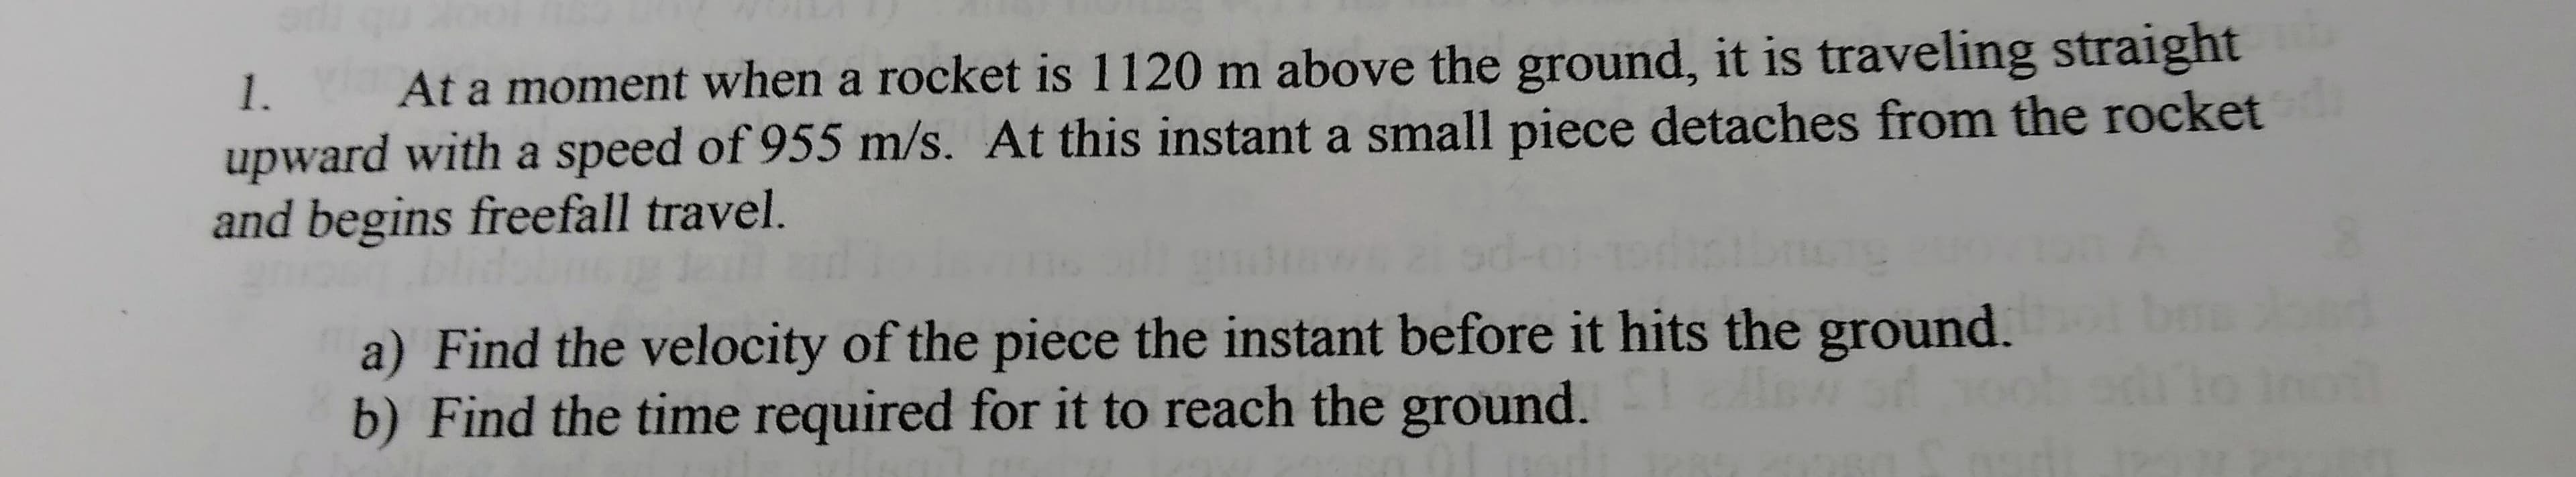 At a moment when a rocket is 1120 m above the ground, it is traveling straight
upward with a speed of 955 m/s. At this instant a small piece detaches from the rocket
and begins freefall travel.
1.
a) Find the velocity of the piece the instant before it hits the ground.
b) Find the time required for it to reach the ground.
